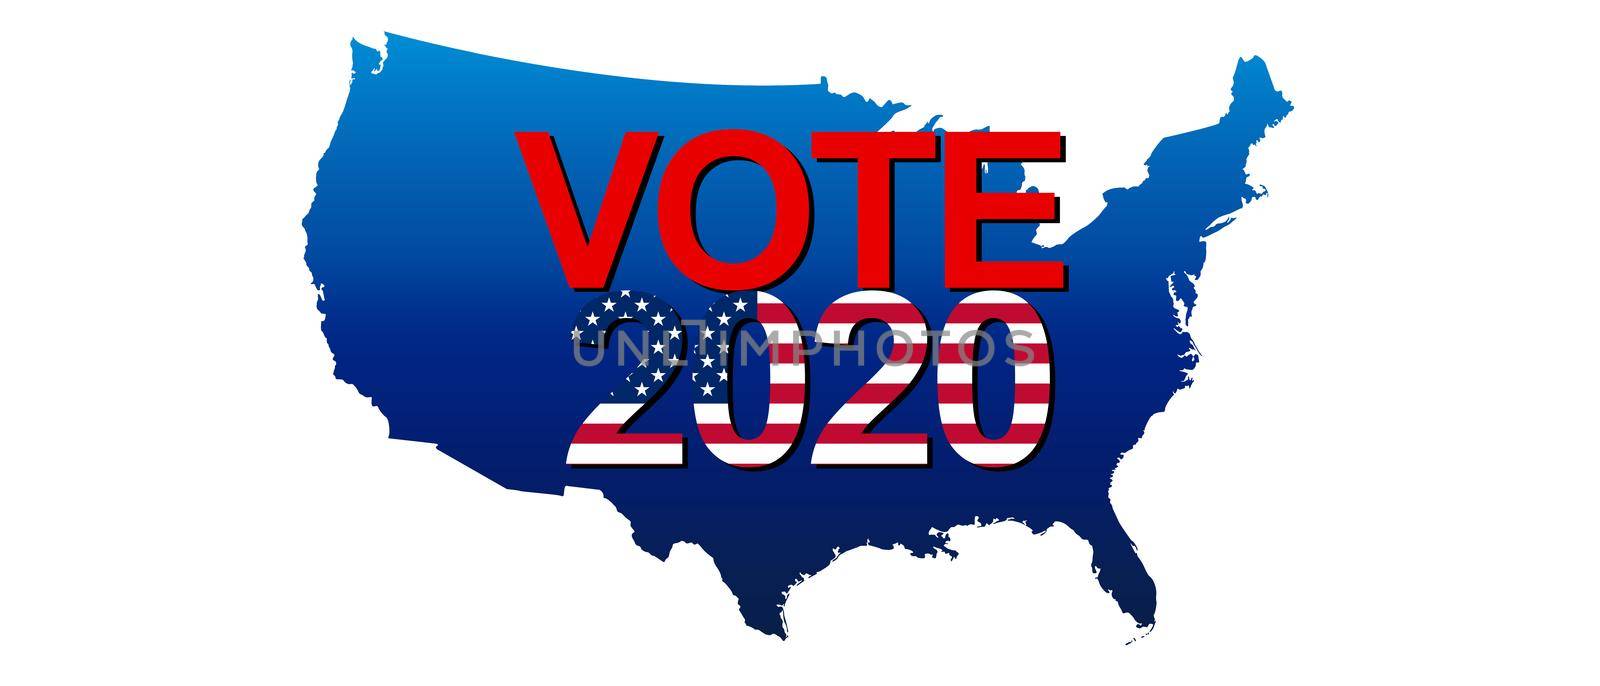 Vote presidential election 2020 in United States of America. by Taut